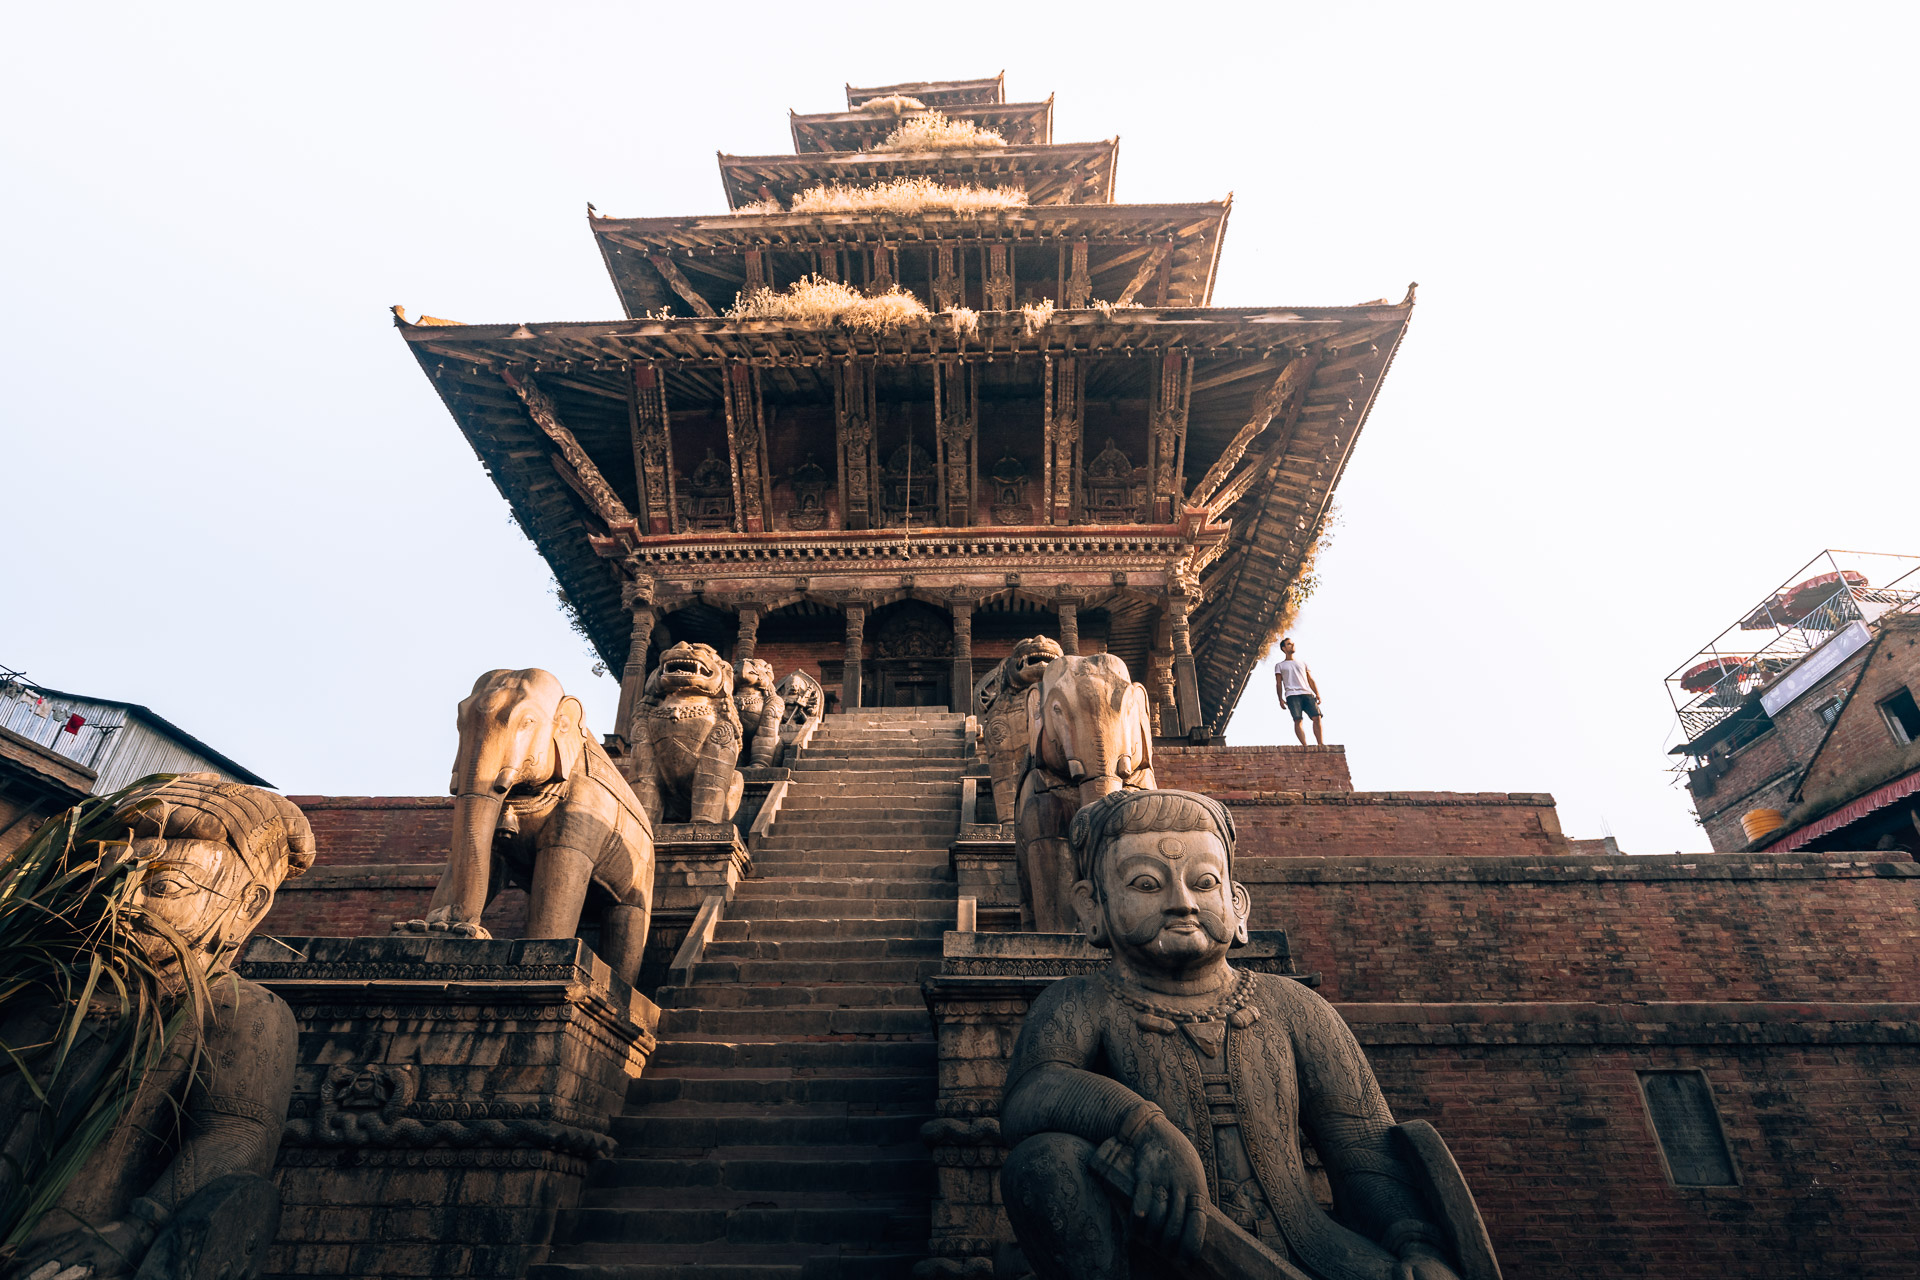 TRAVEL TIPS FOR NEPAL - THINGS YOU NEED TO KNOW